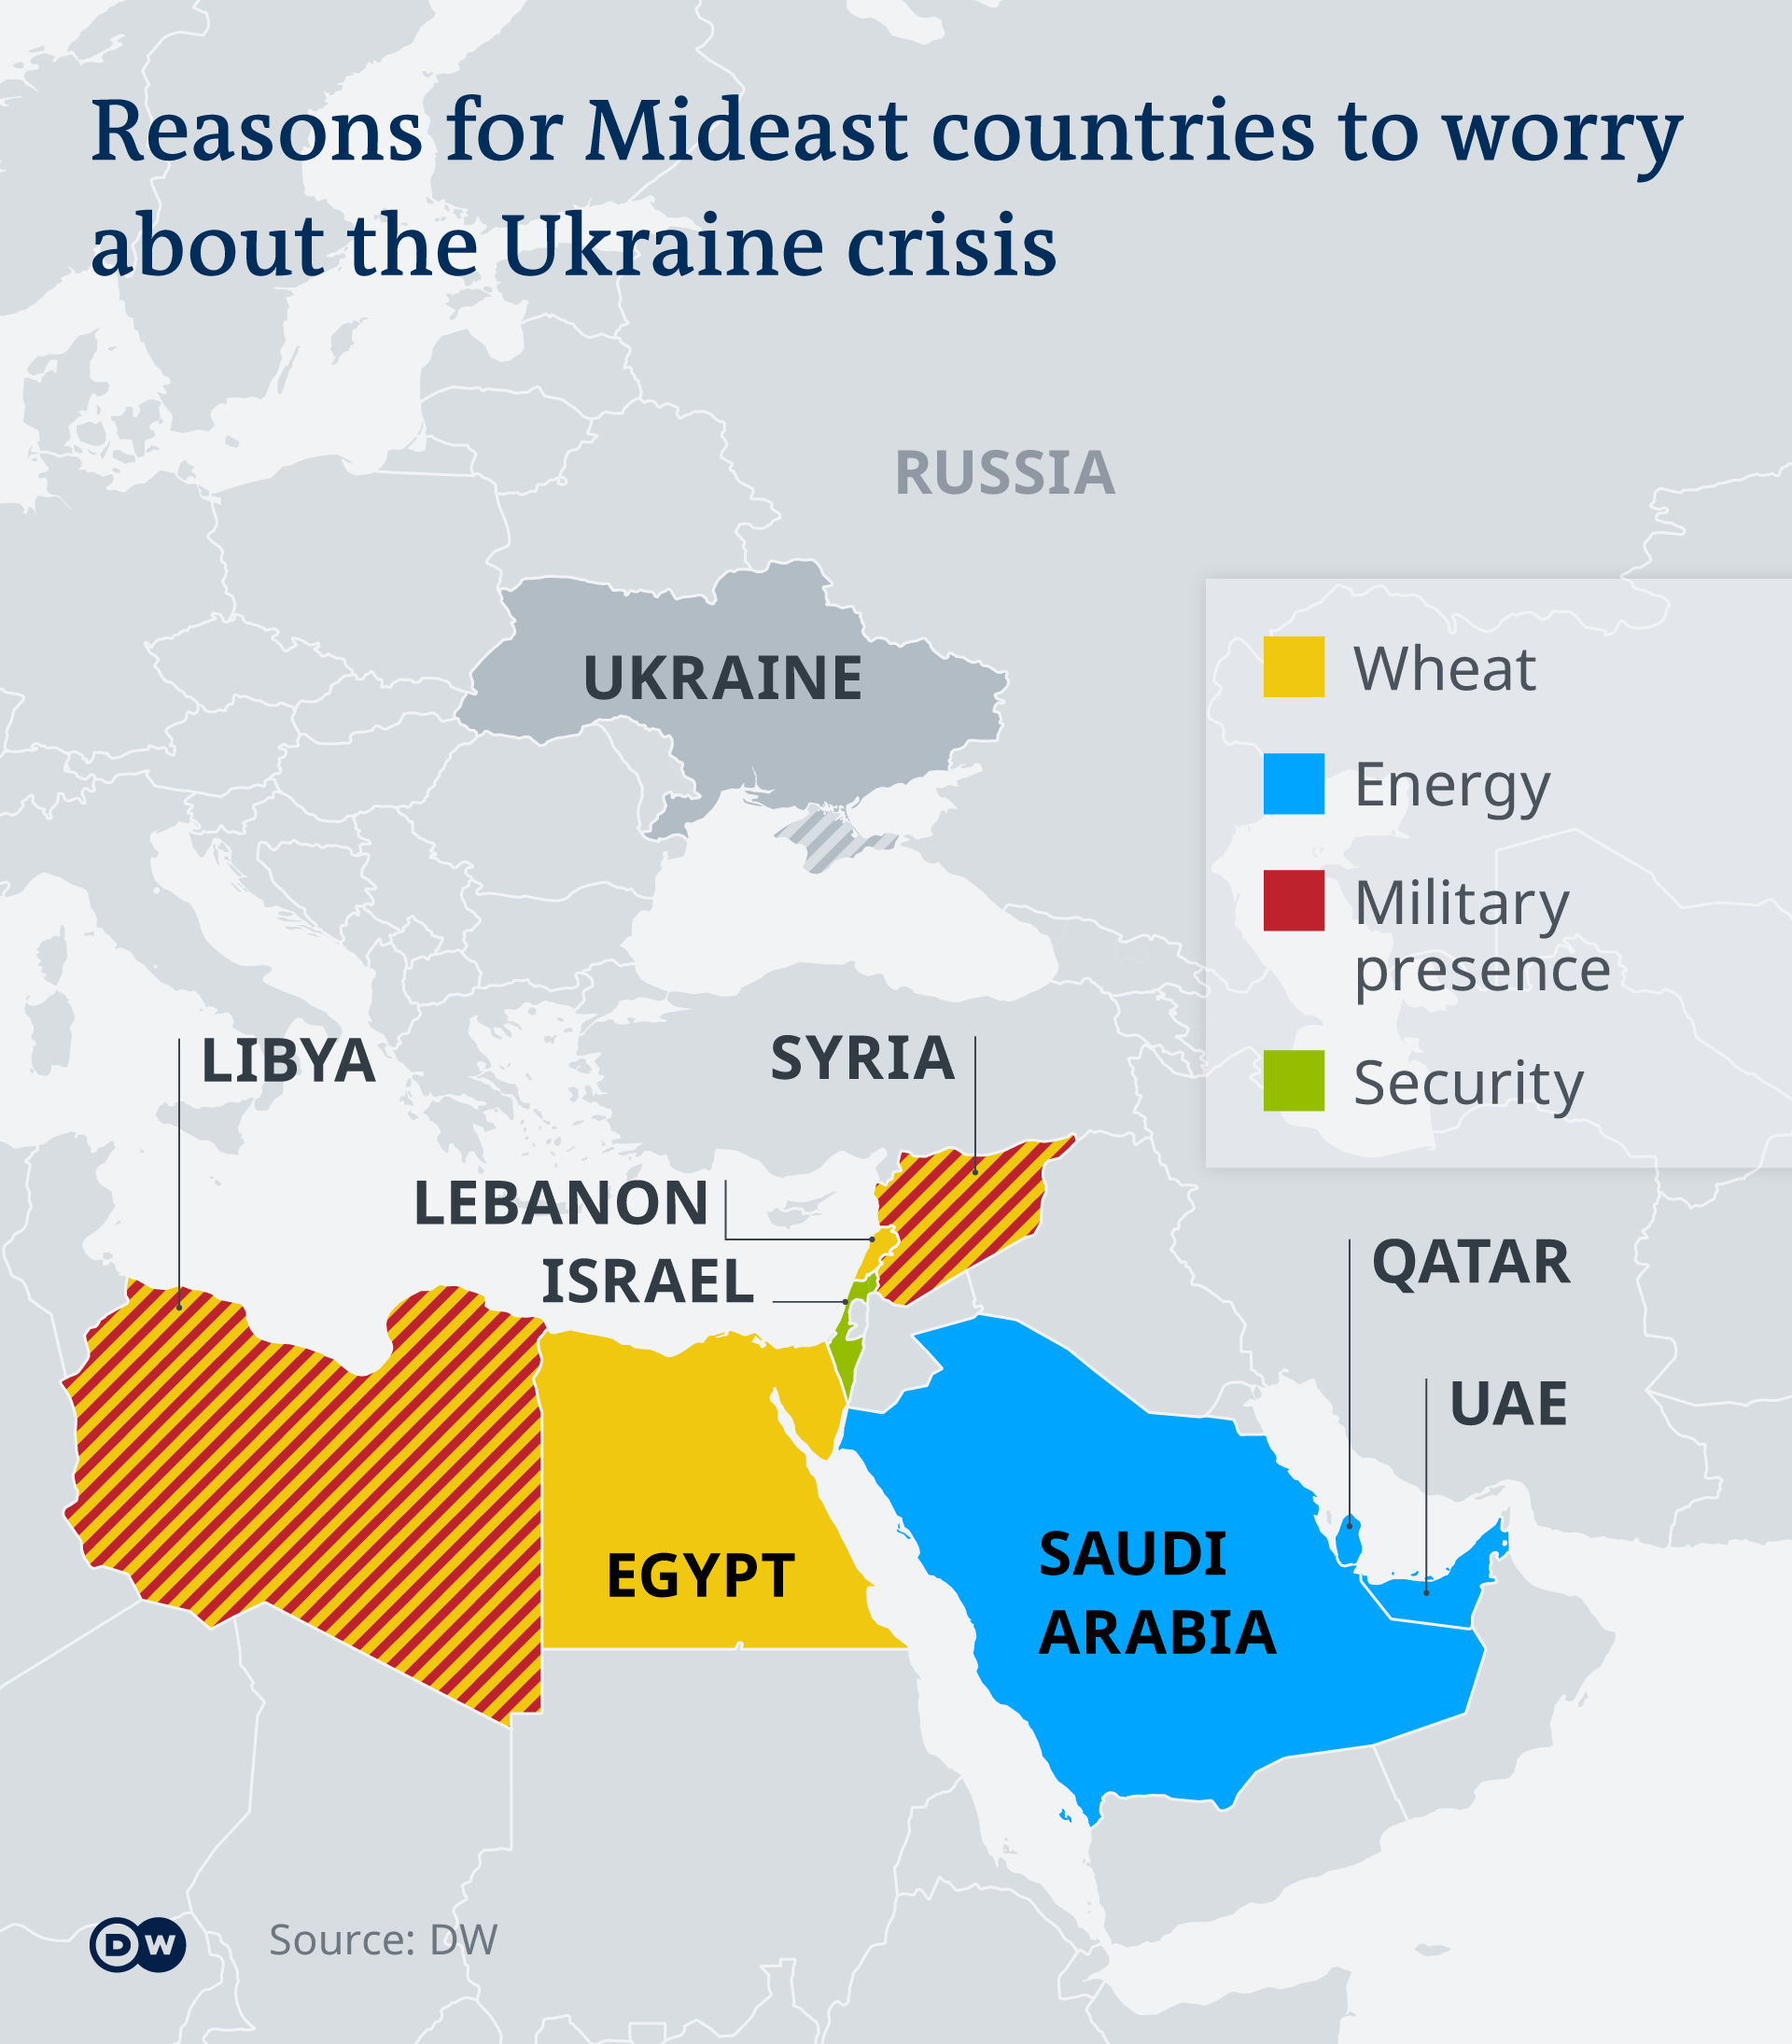 Infographic showing economic ties between the Middle East and Ukraine